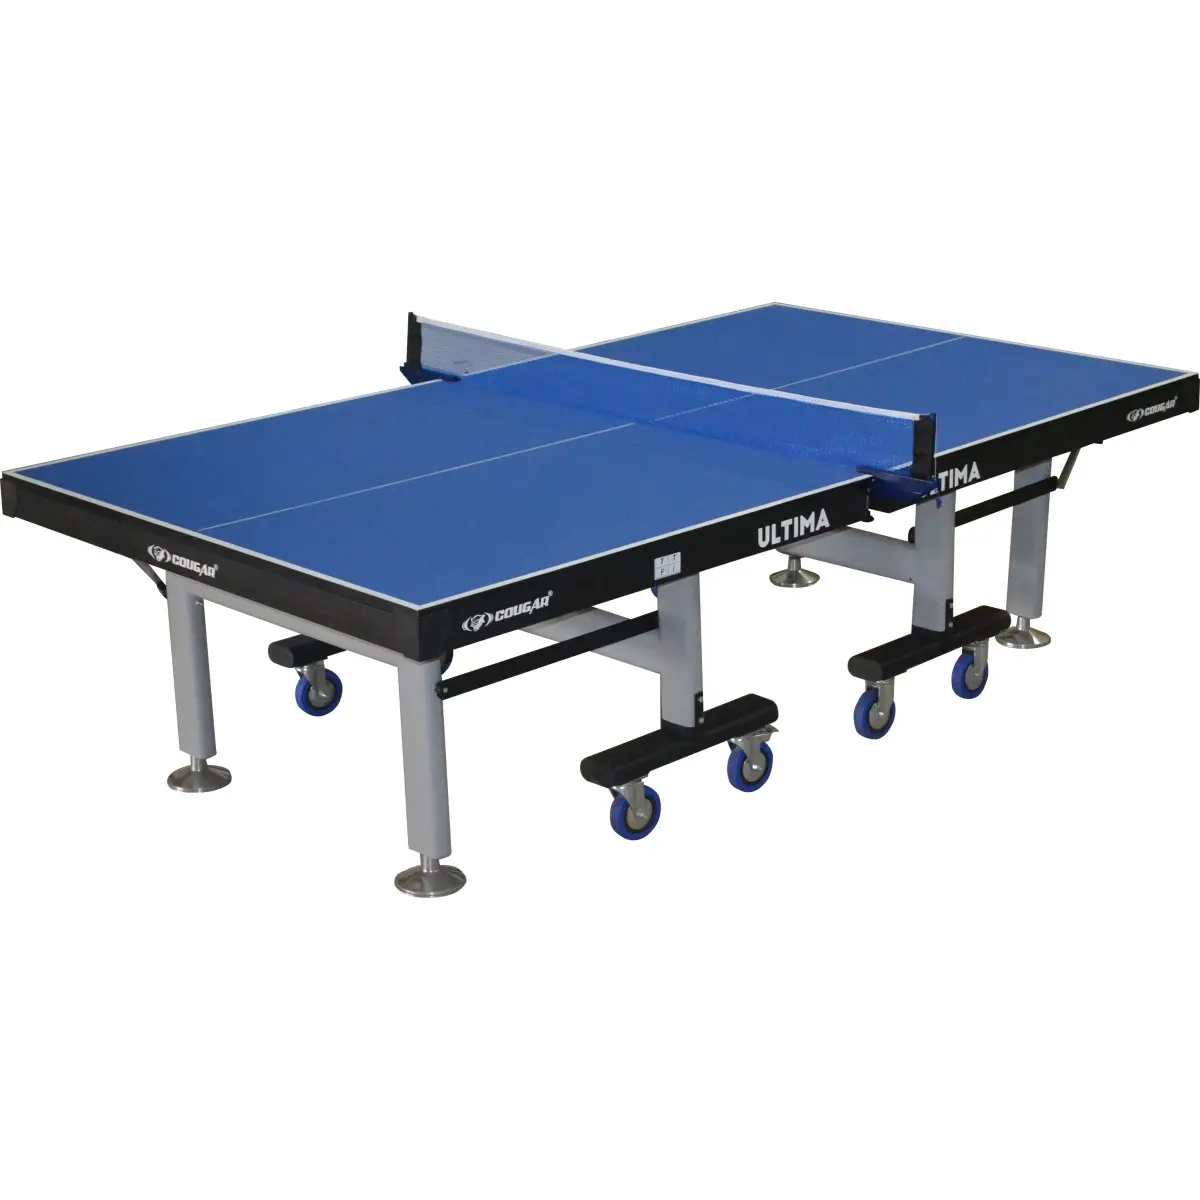 Buy Cougar Ultima Table Tennis Table - 25mm